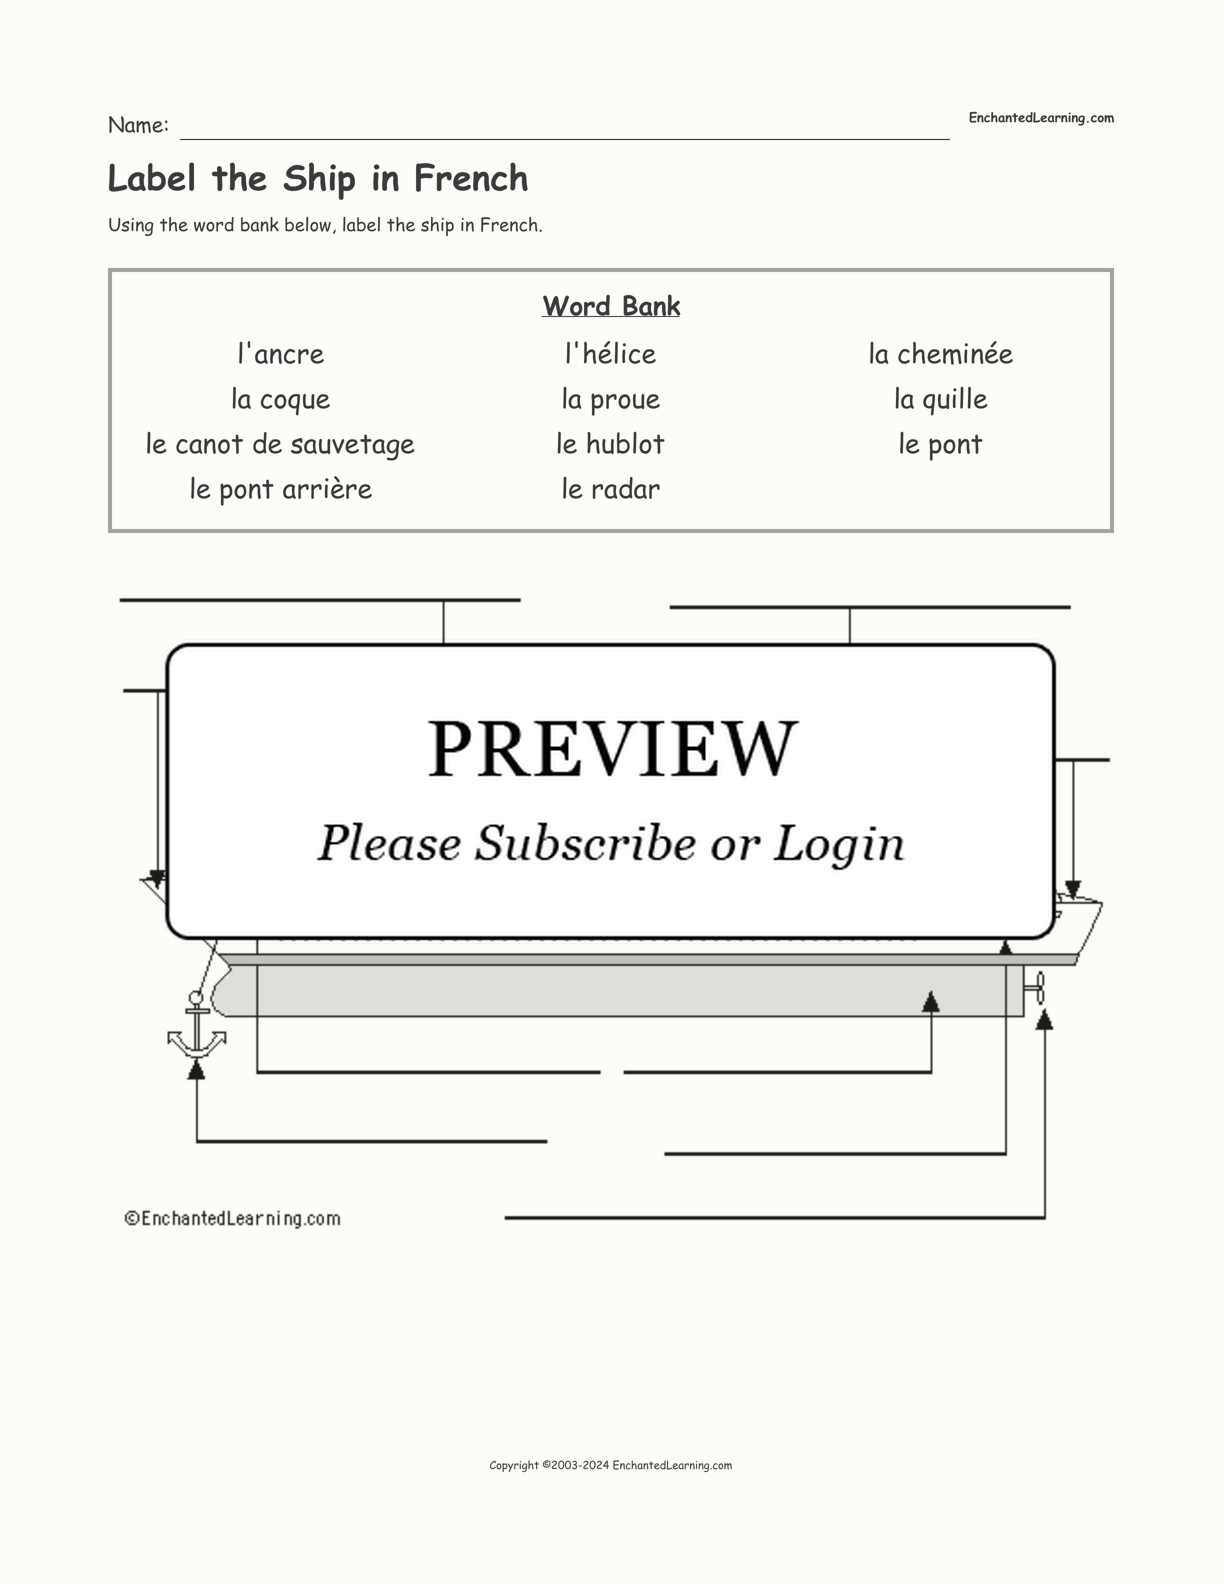 Label the Ship in French interactive worksheet page 1